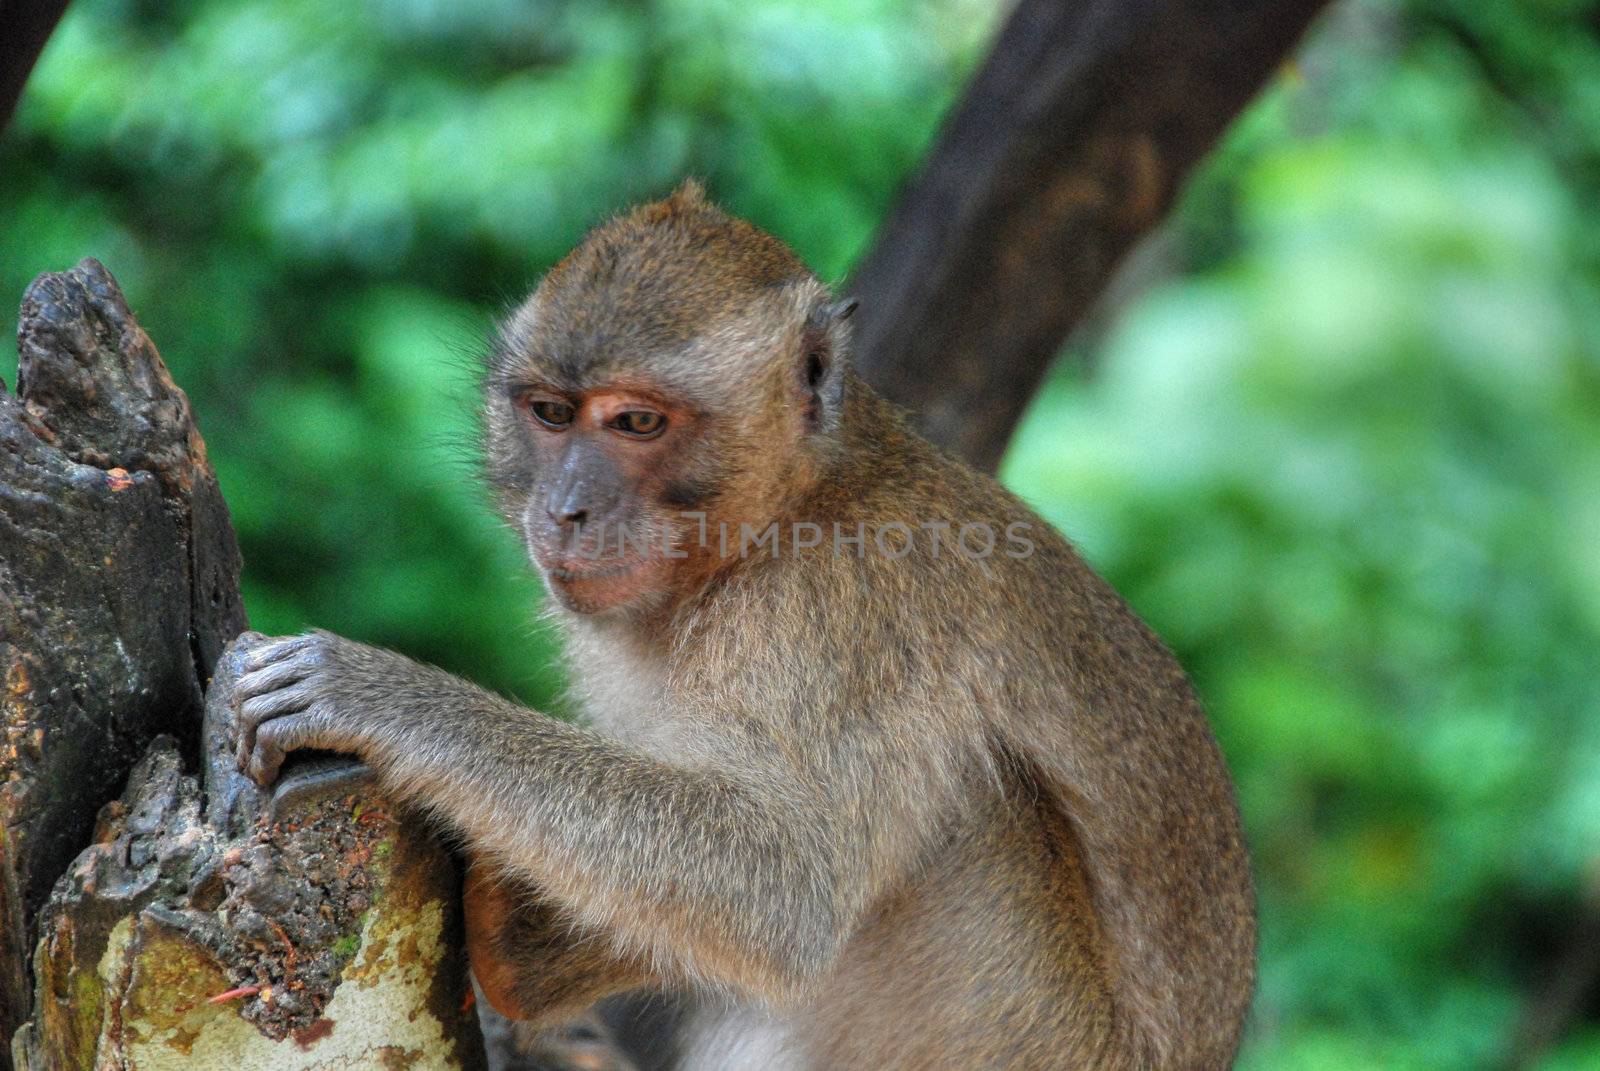 A Monkey in a very expressive position near Changmai